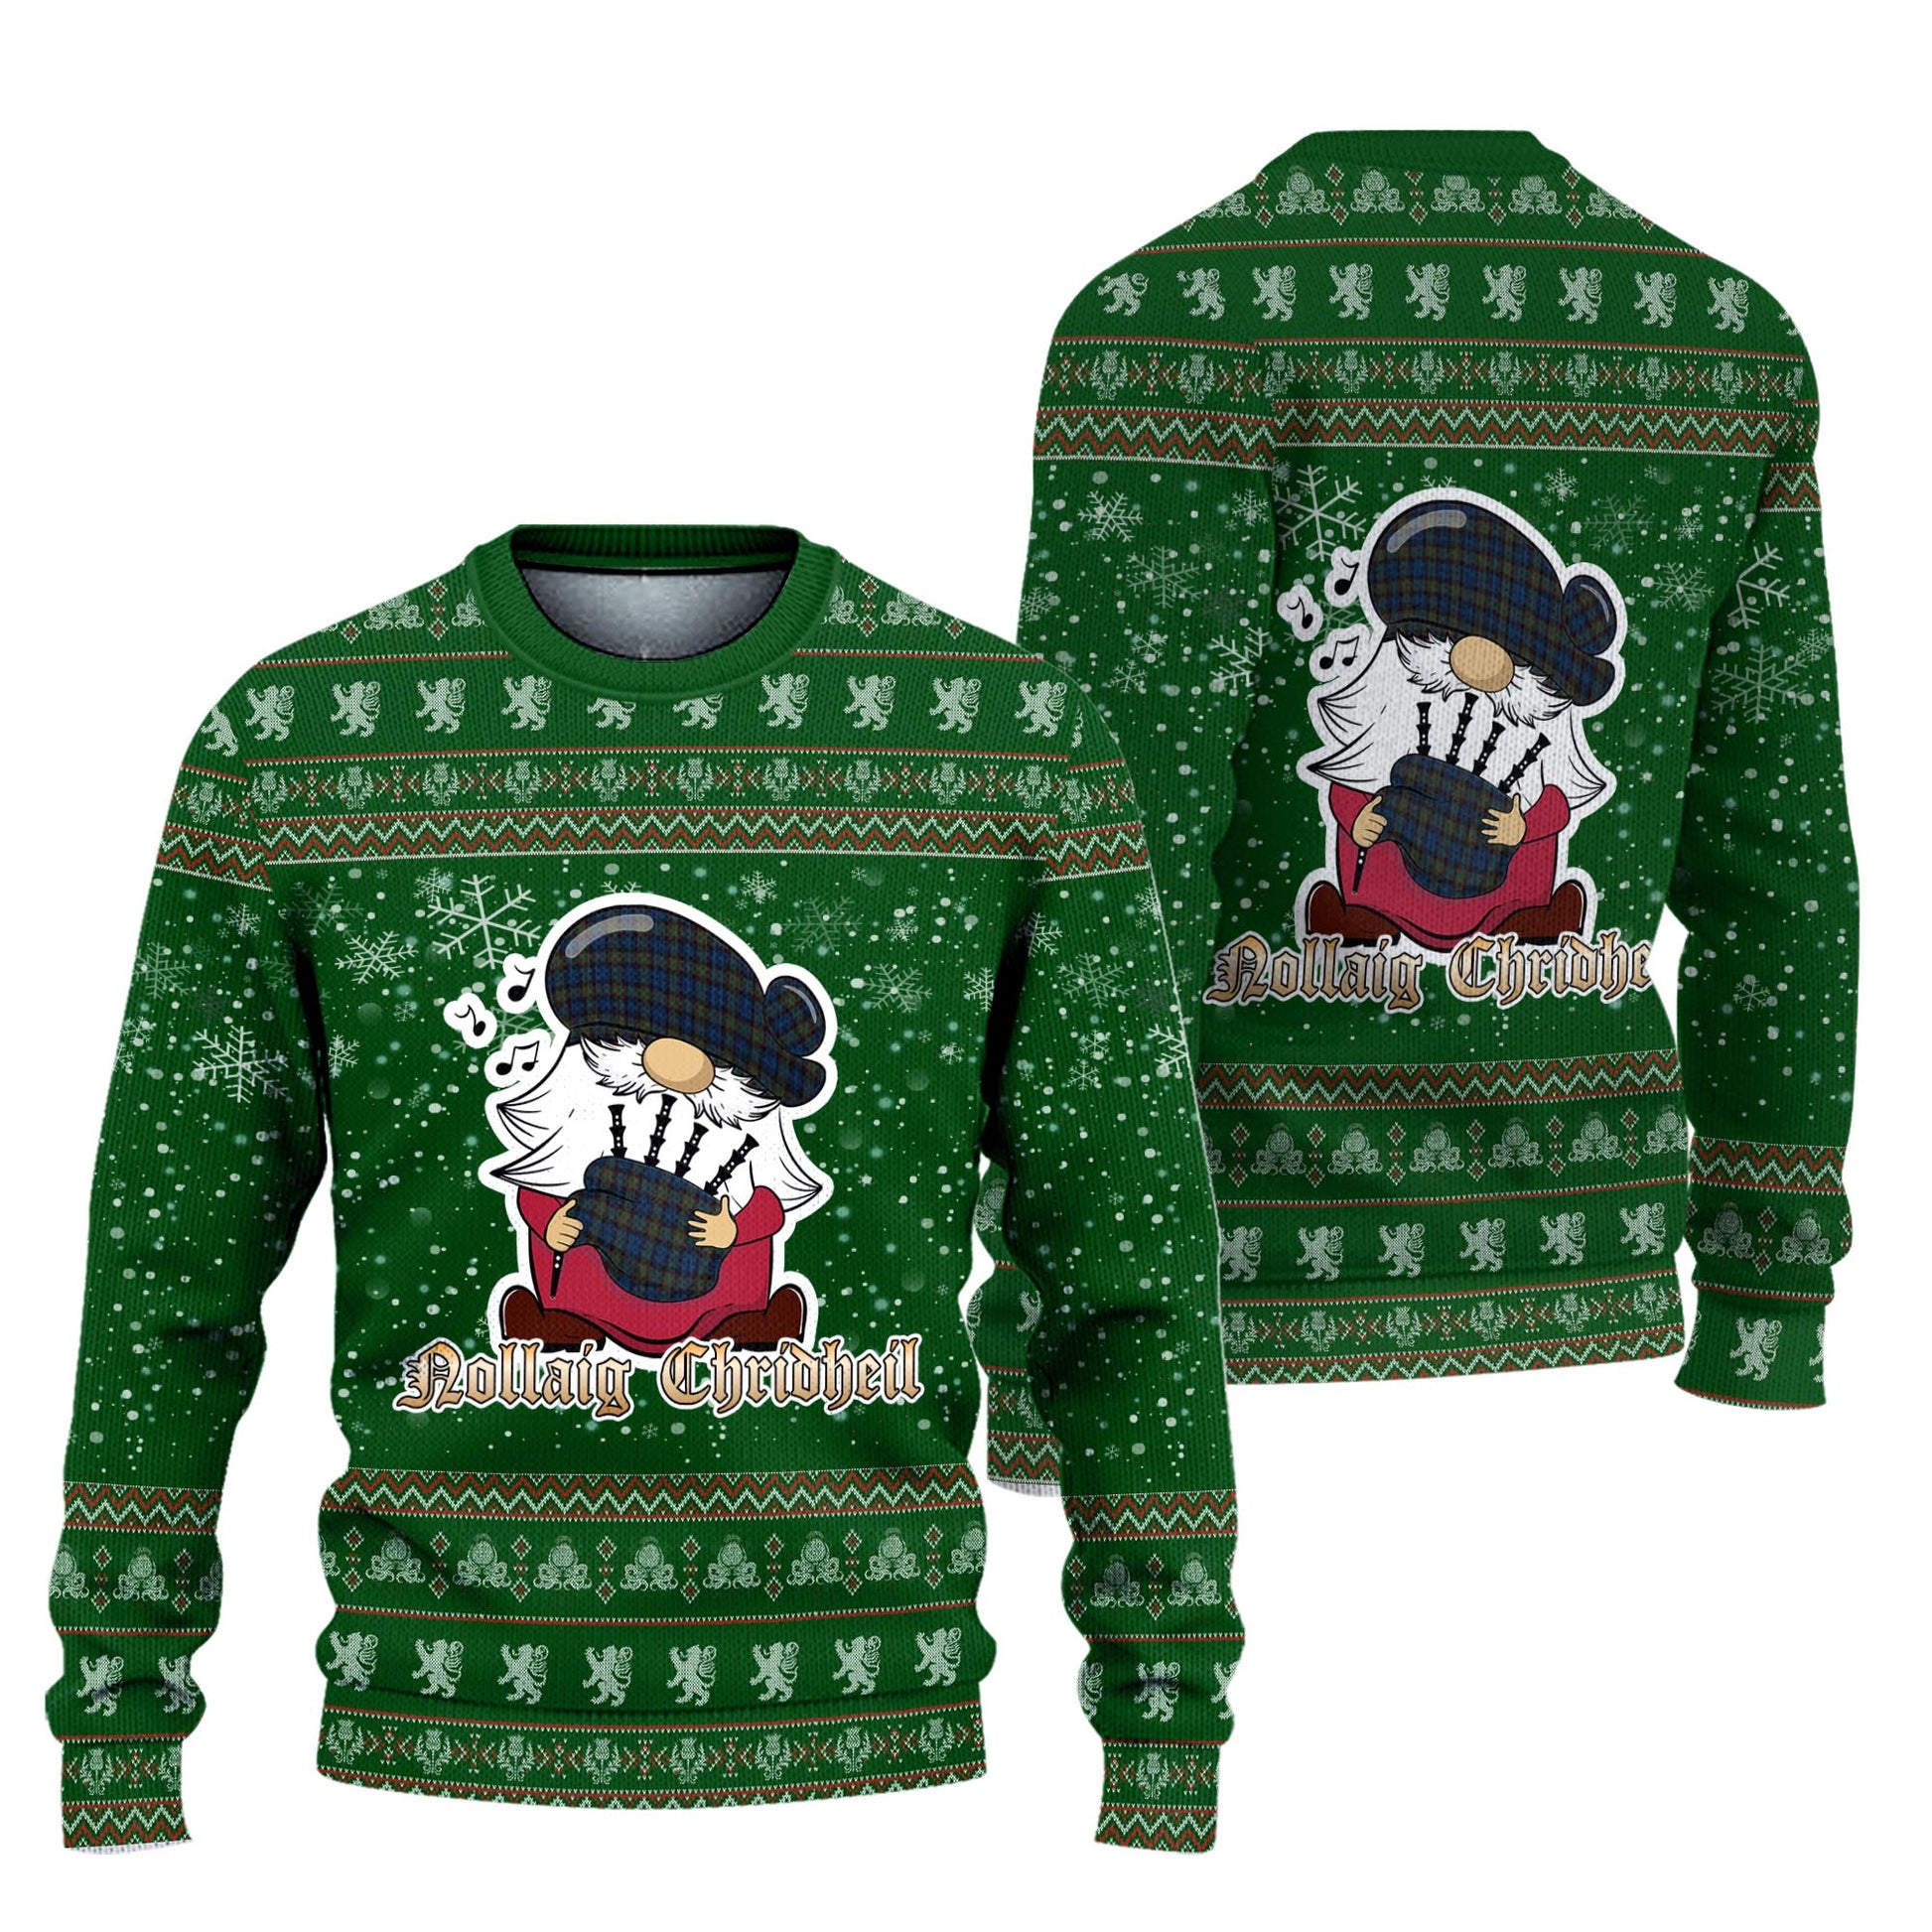 Riddoch Clan Christmas Family Knitted Sweater with Funny Gnome Playing Bagpipes Unisex Green - Tartanvibesclothing